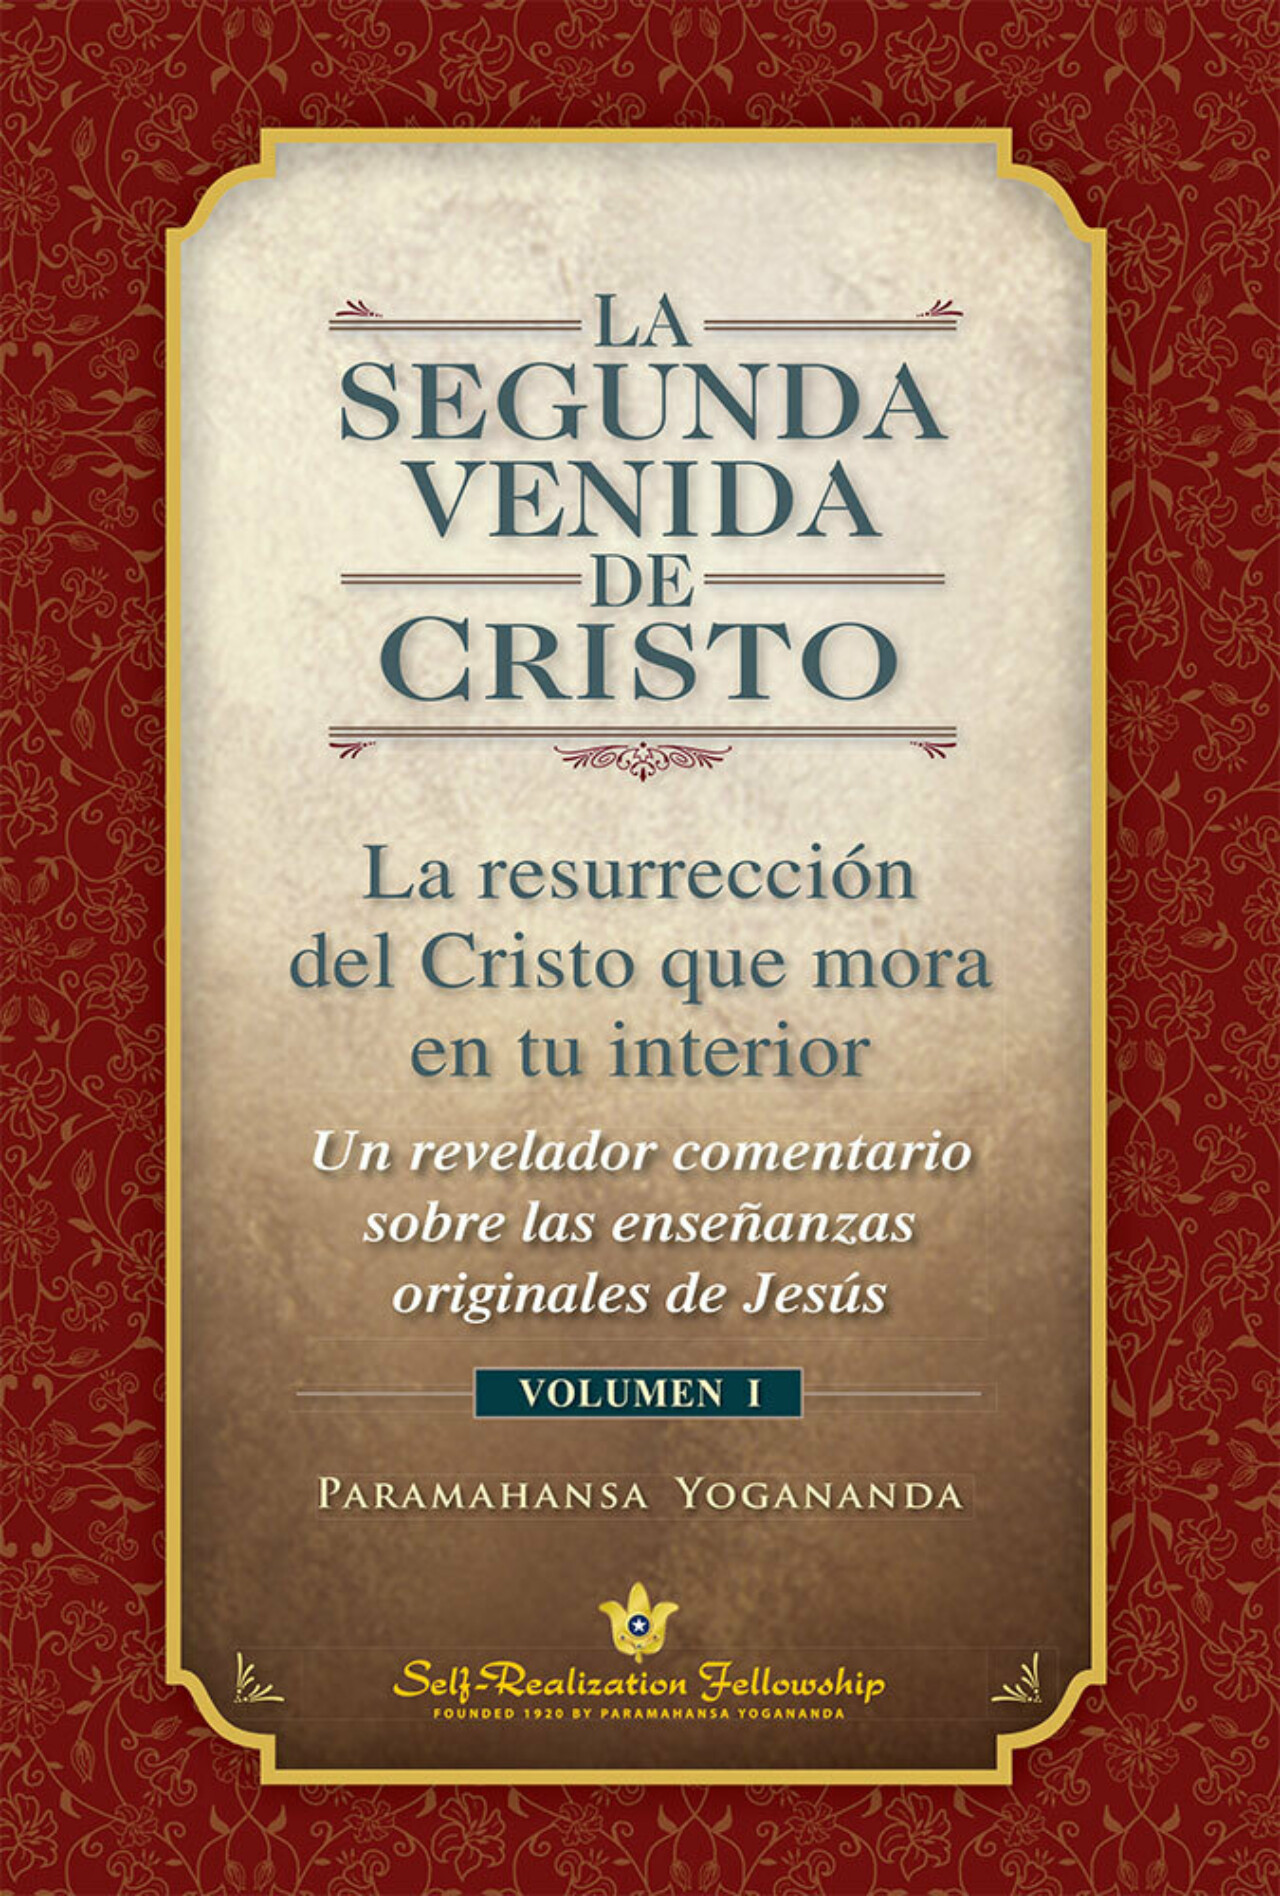 Second Coming of Christ Volume I Front Cover Spanish